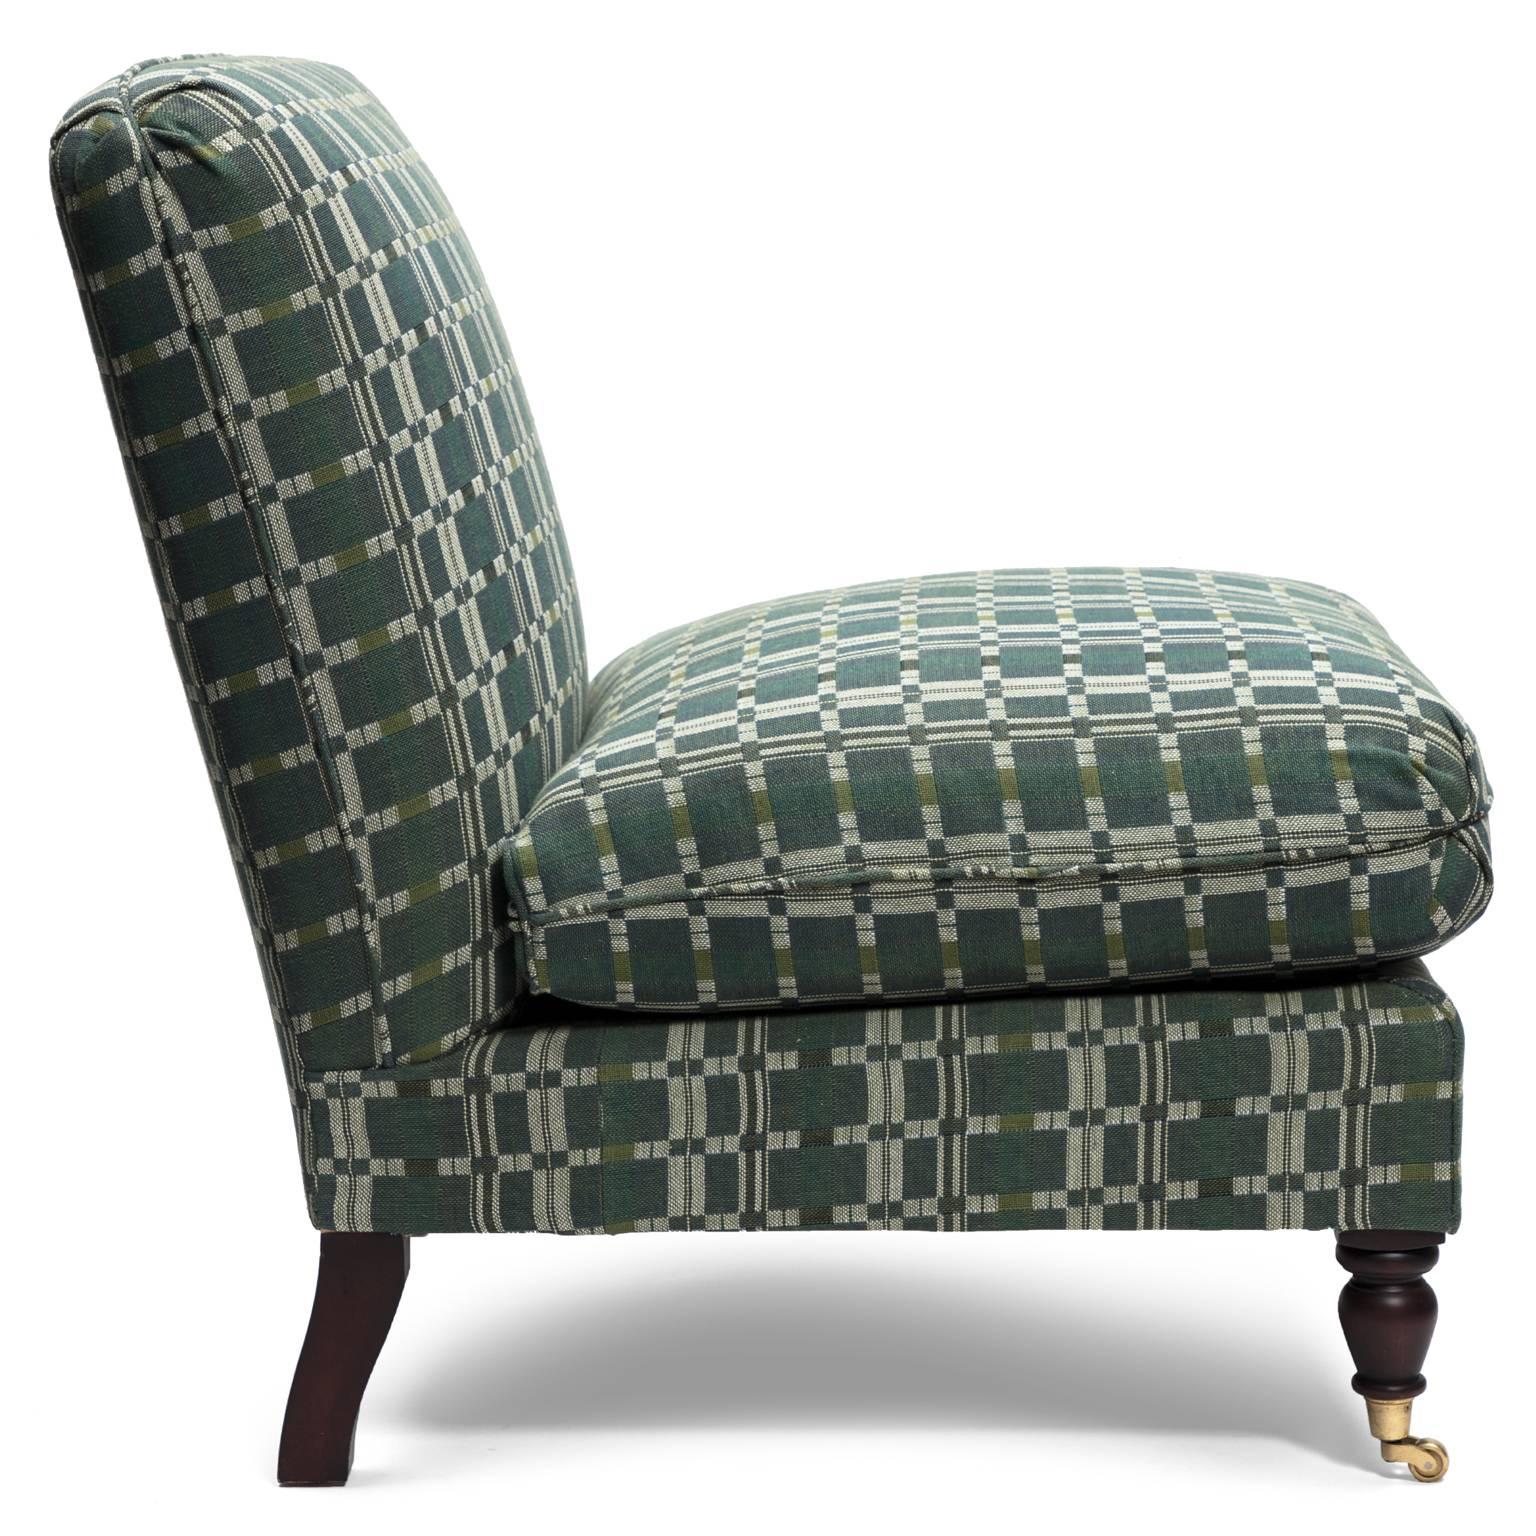 Covered in ZAK + FOX Togo fabric, this vintage slipper chair has been upholstered with Turkish corners. Pinch pleating creates a neat, rounded tuck at each edge; this tailored upholstery method establishes seamless lines from backrest to cushion to